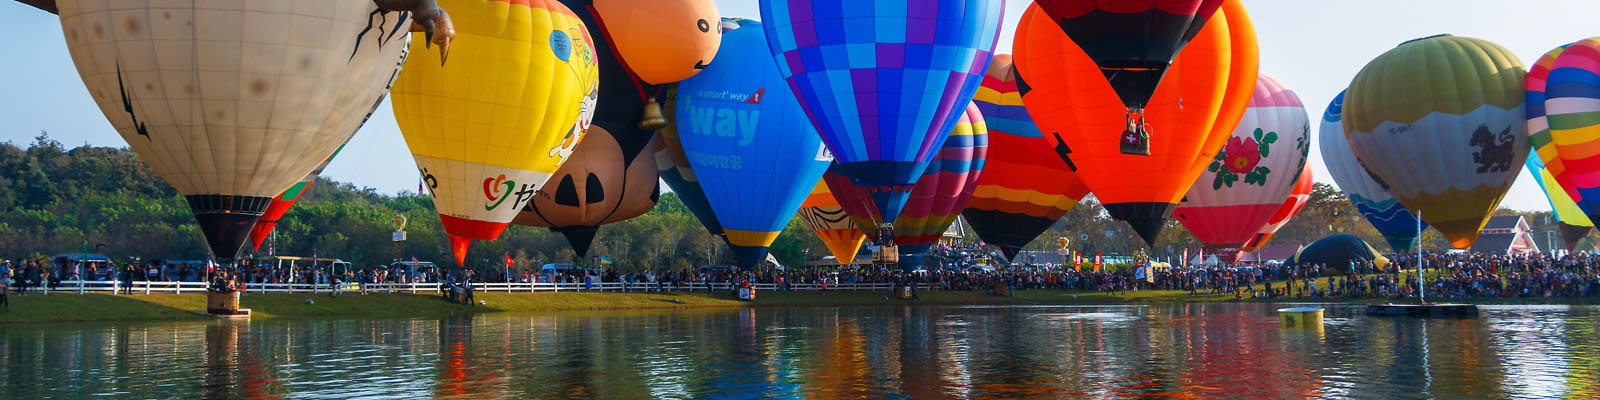 This is an image of hot air balloons in Albuquerque where ASTA-USA provides professional translation services.